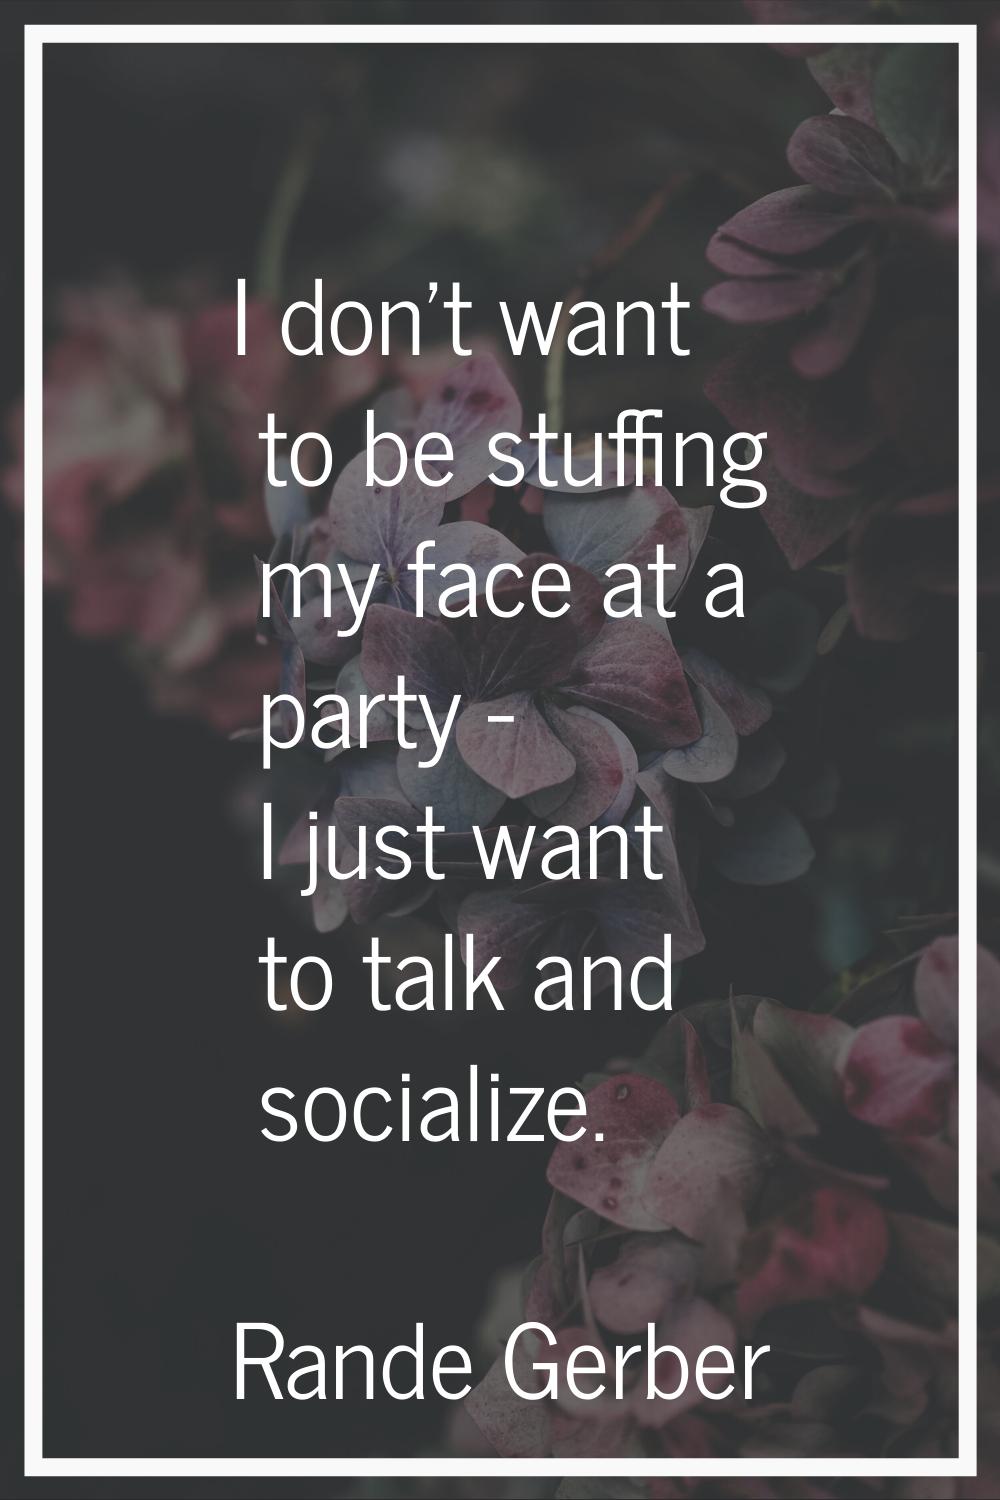 I don't want to be stuffing my face at a party - I just want to talk and socialize.